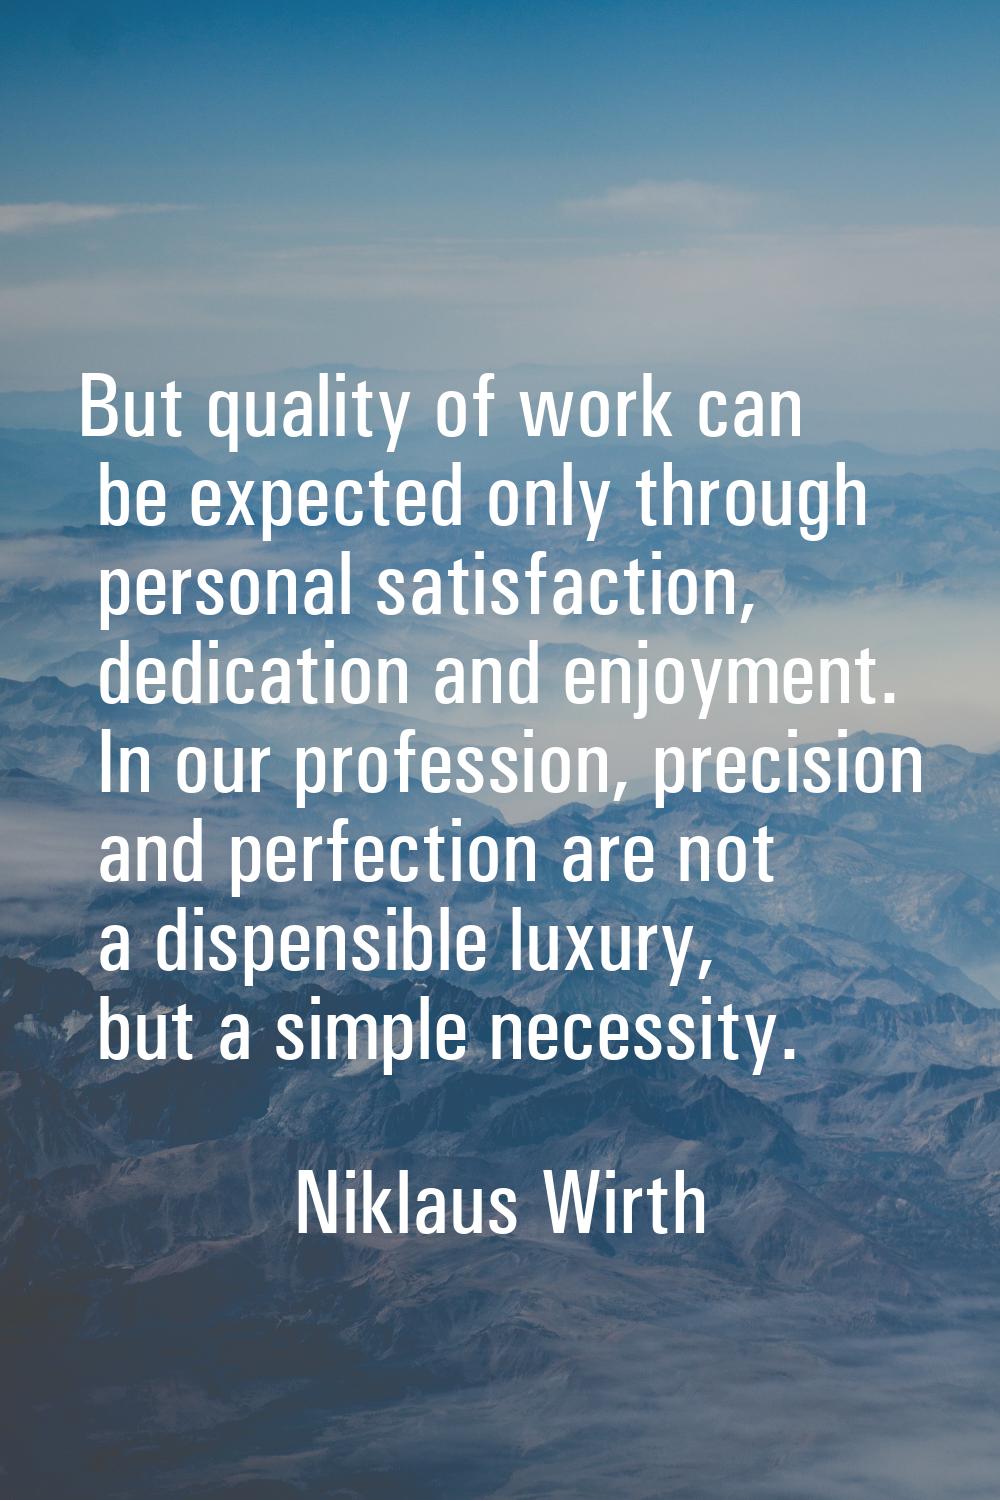 But quality of work can be expected only through personal satisfaction, dedication and enjoyment. I